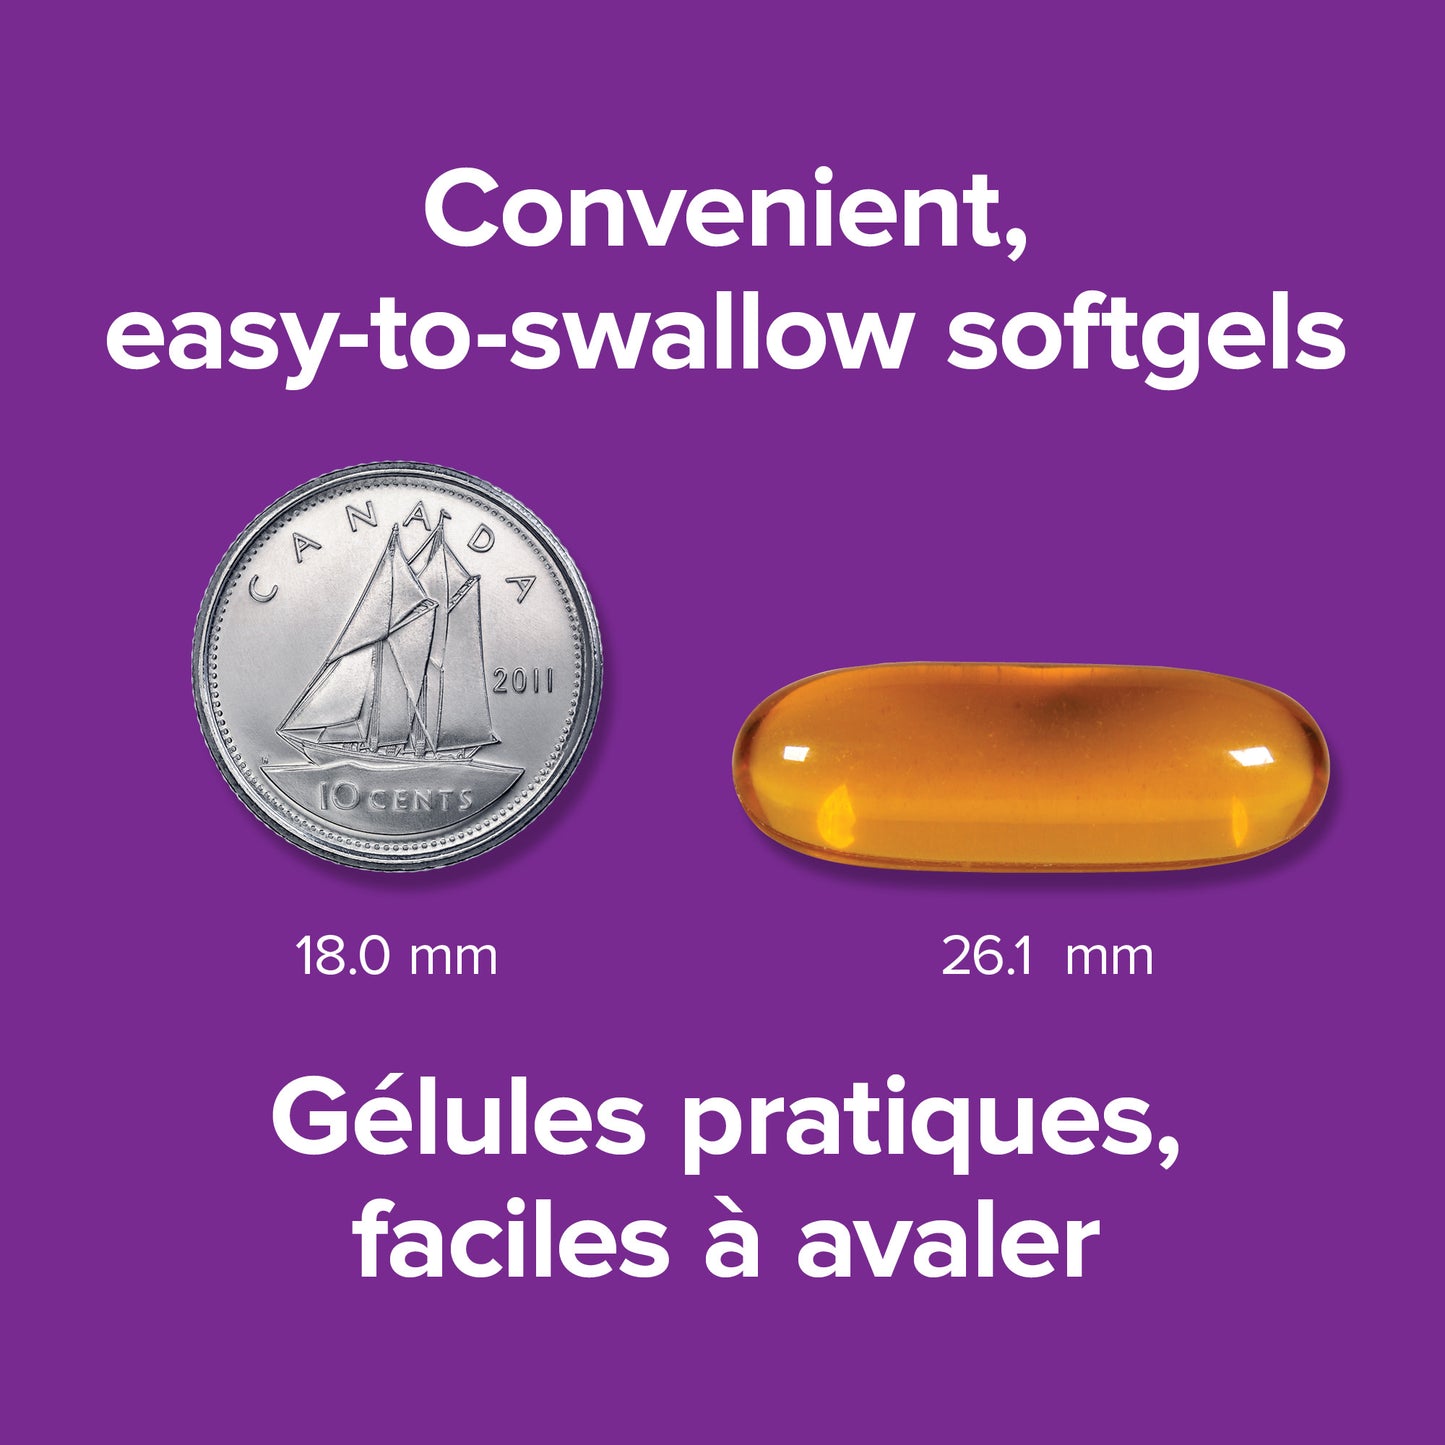 specifications-Huile de Saumon Sauvage d'Alaska 200 mg AEP/ADH 1 000 mg for Webber Naturals